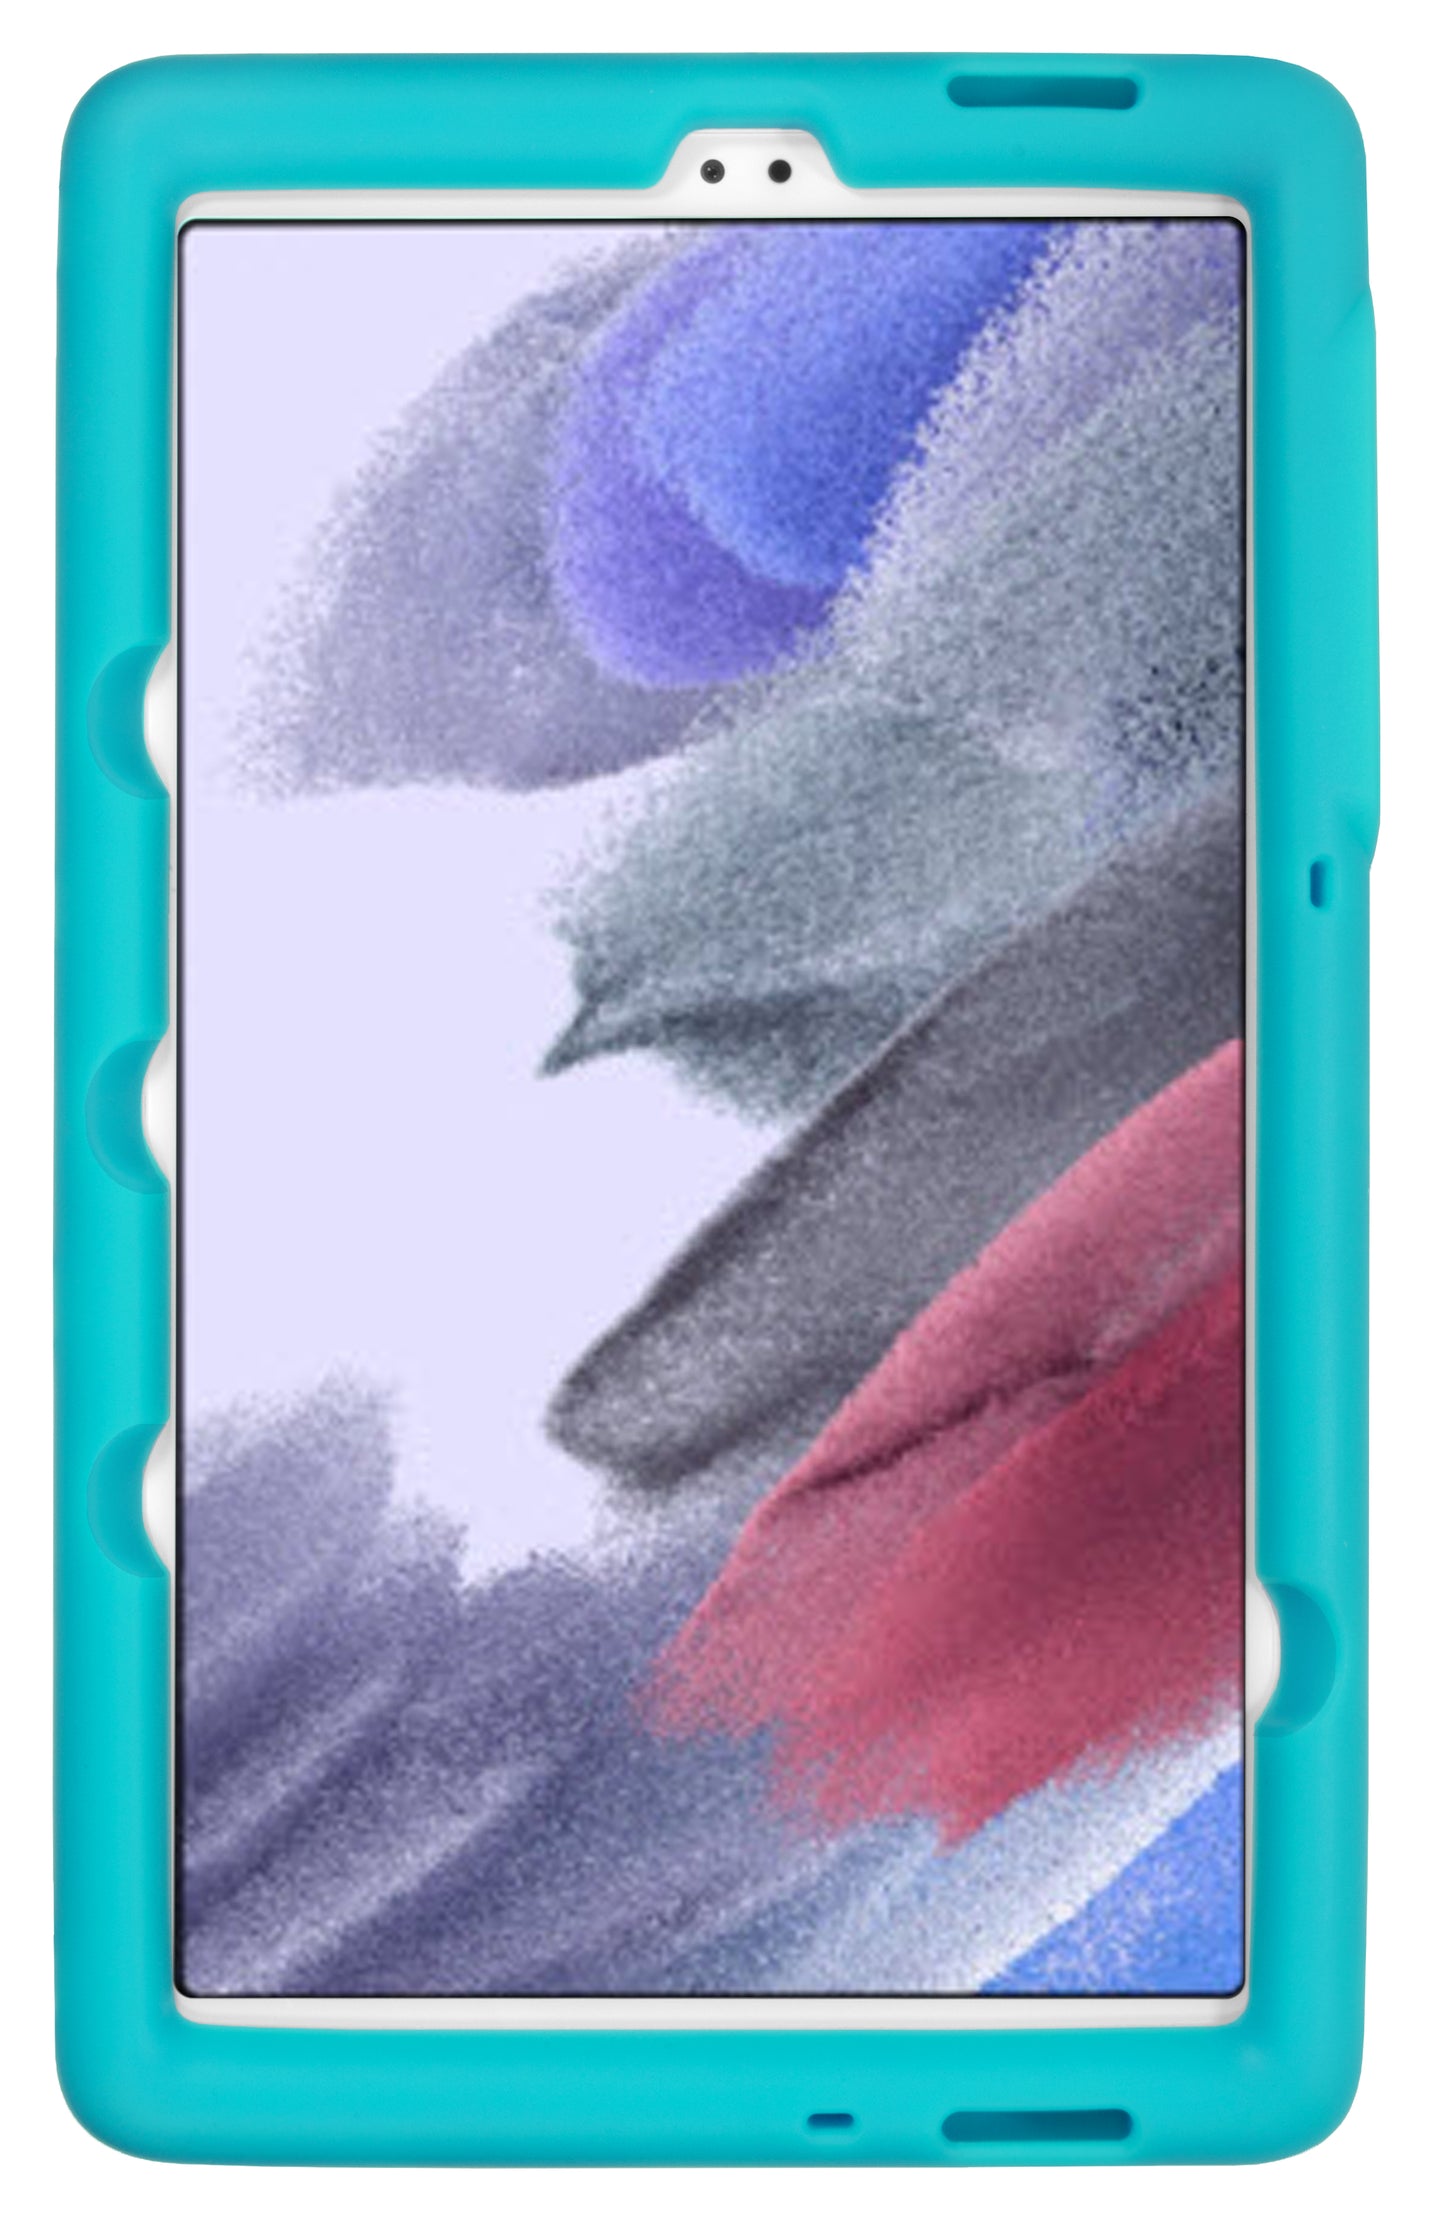 Bobj Rugged Tablet Case for Samsung Galaxy Tab A7 Lite 8.7 inch SM-T220, SM-T225, SM-T227 - Terrific Turquoise